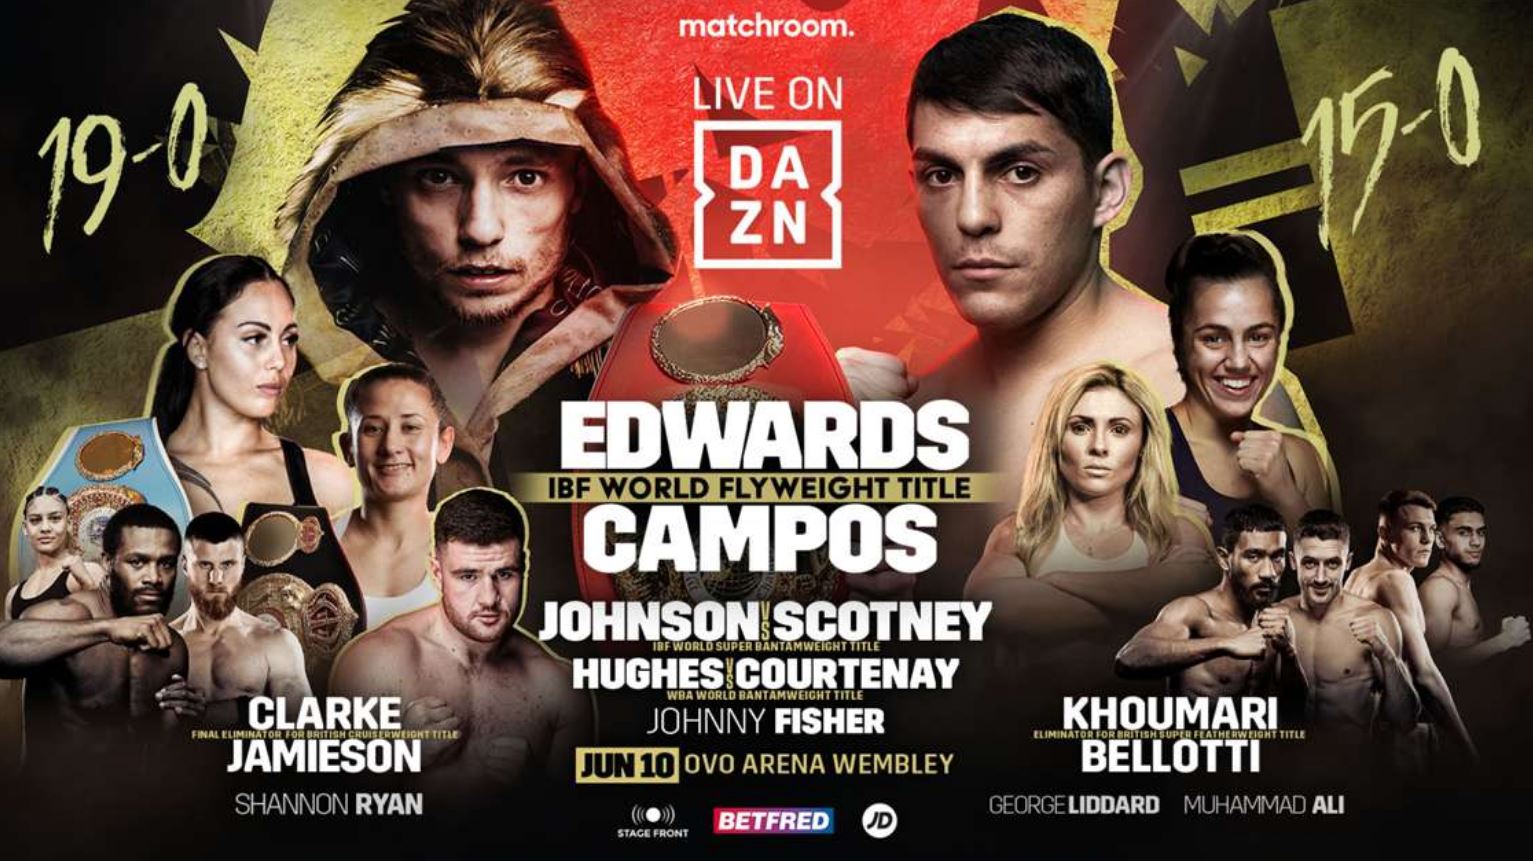 How to watch the Sunny Edwards vs Andres Campos live stream Digital Trends